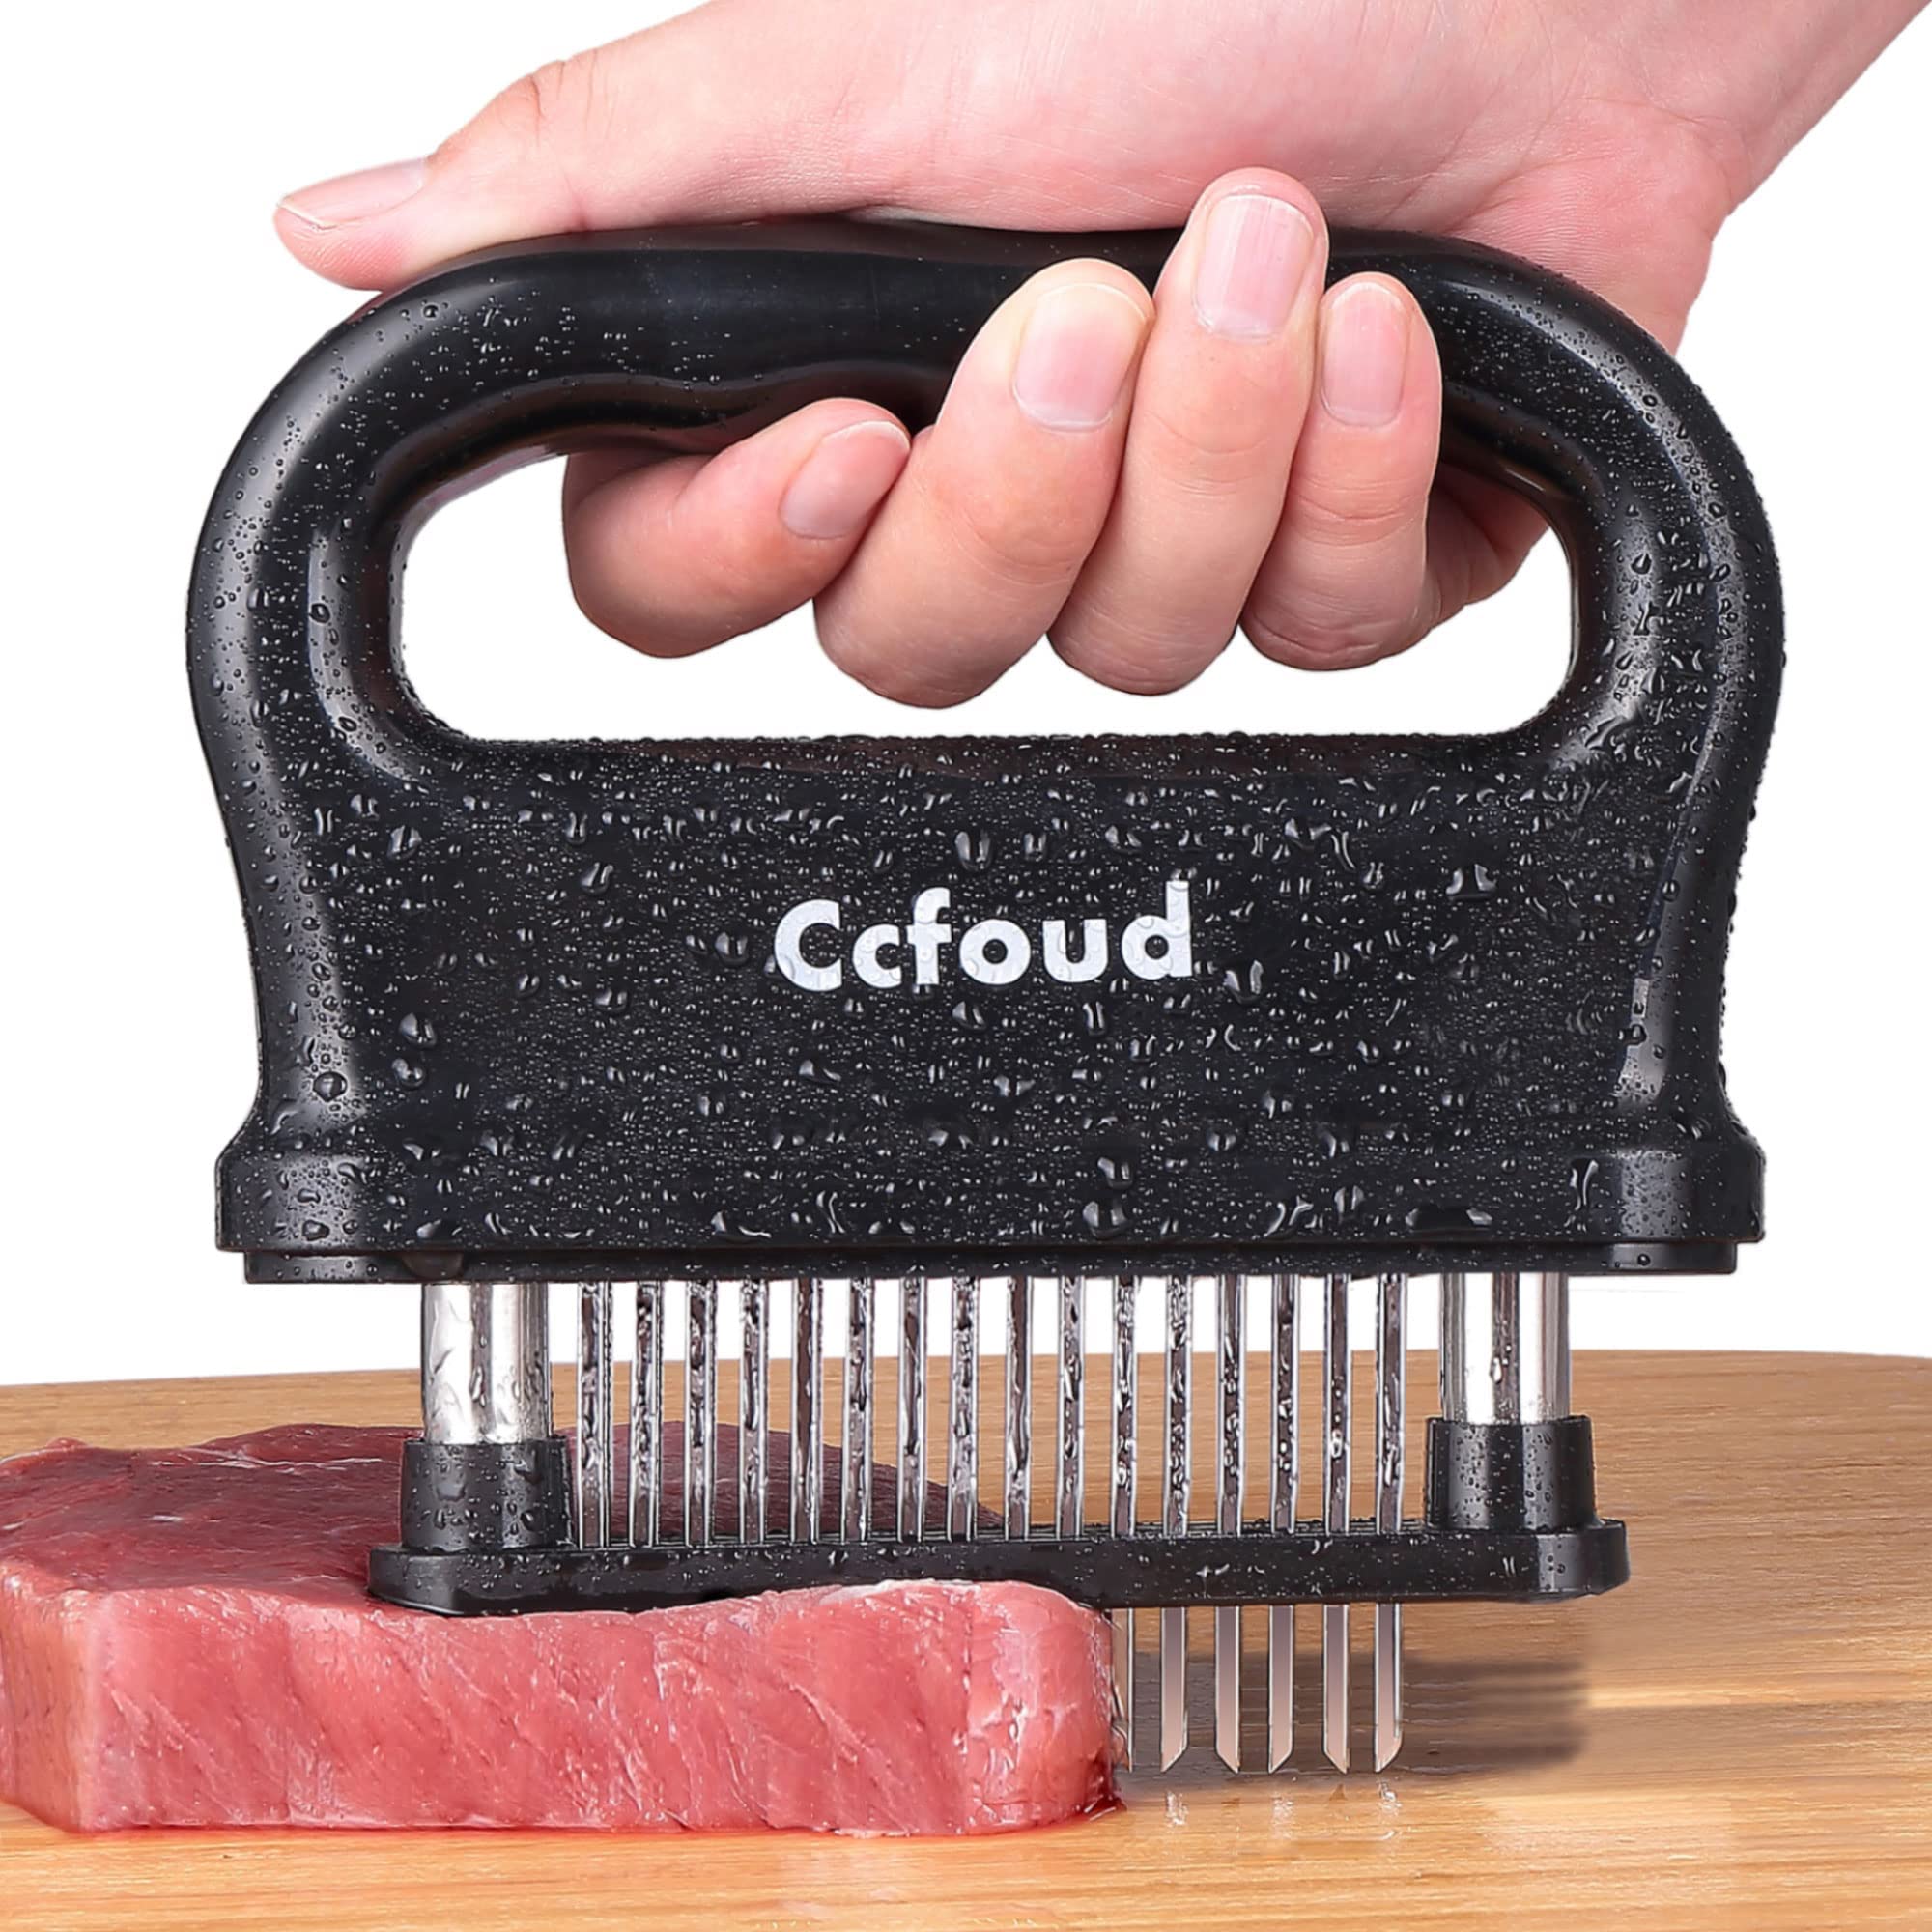 ccfoud Meat Tenderizer, 48 Stainless Steel Ultra Sharp Needle Blade Tenderizer for Tenderizing Steak, Beef with cleaning Brush,D